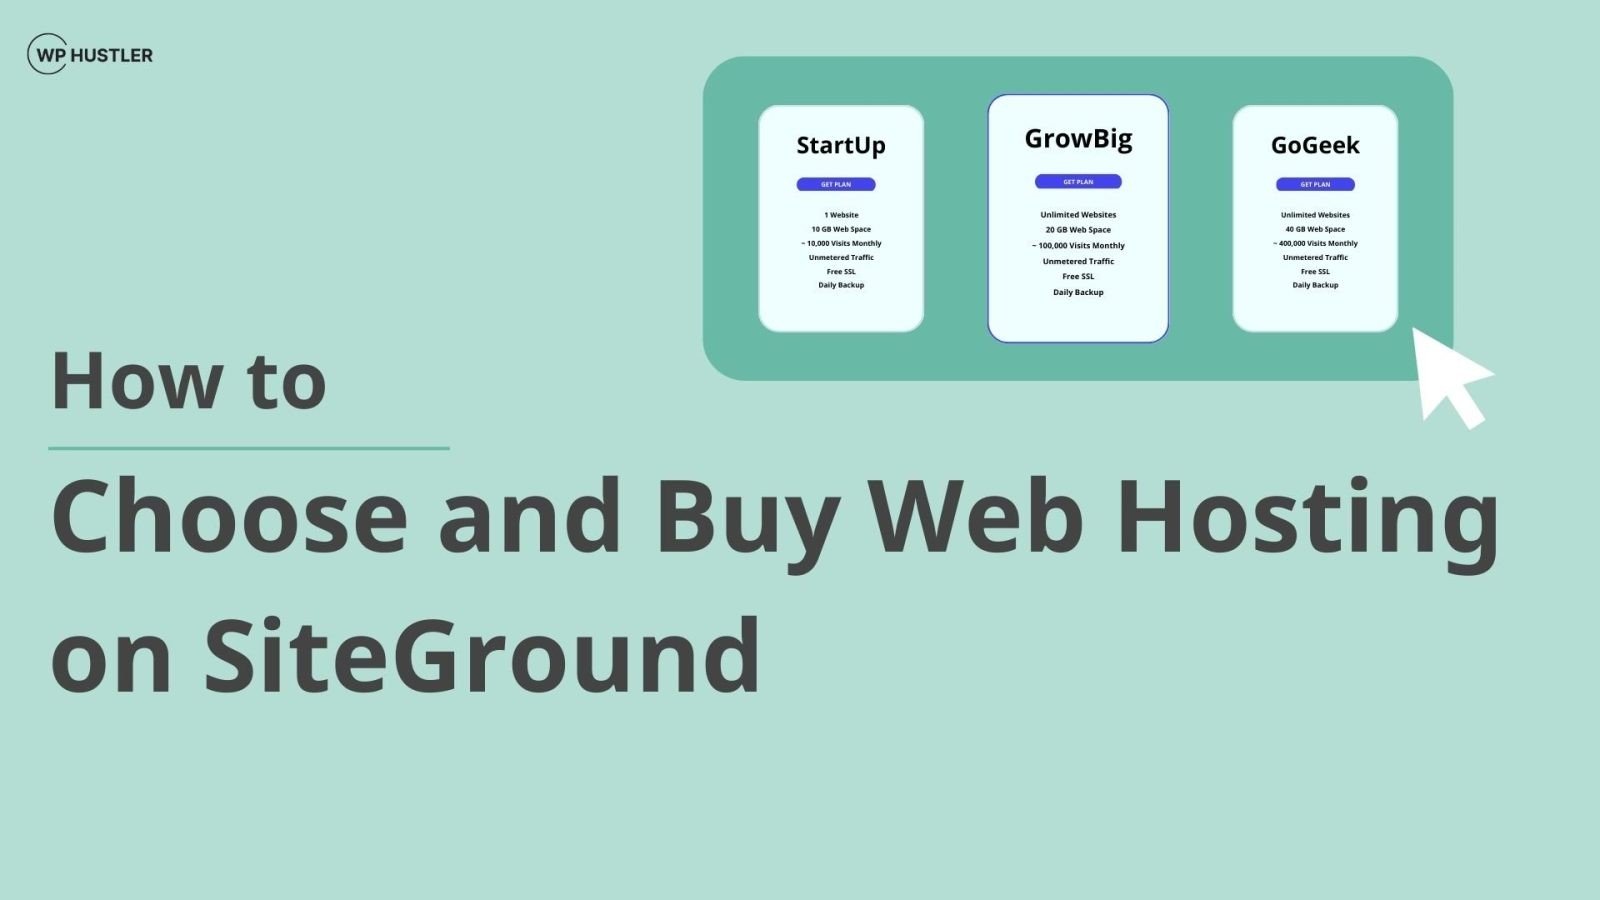 How to Choose and Buy Web Hosting on SiteGround